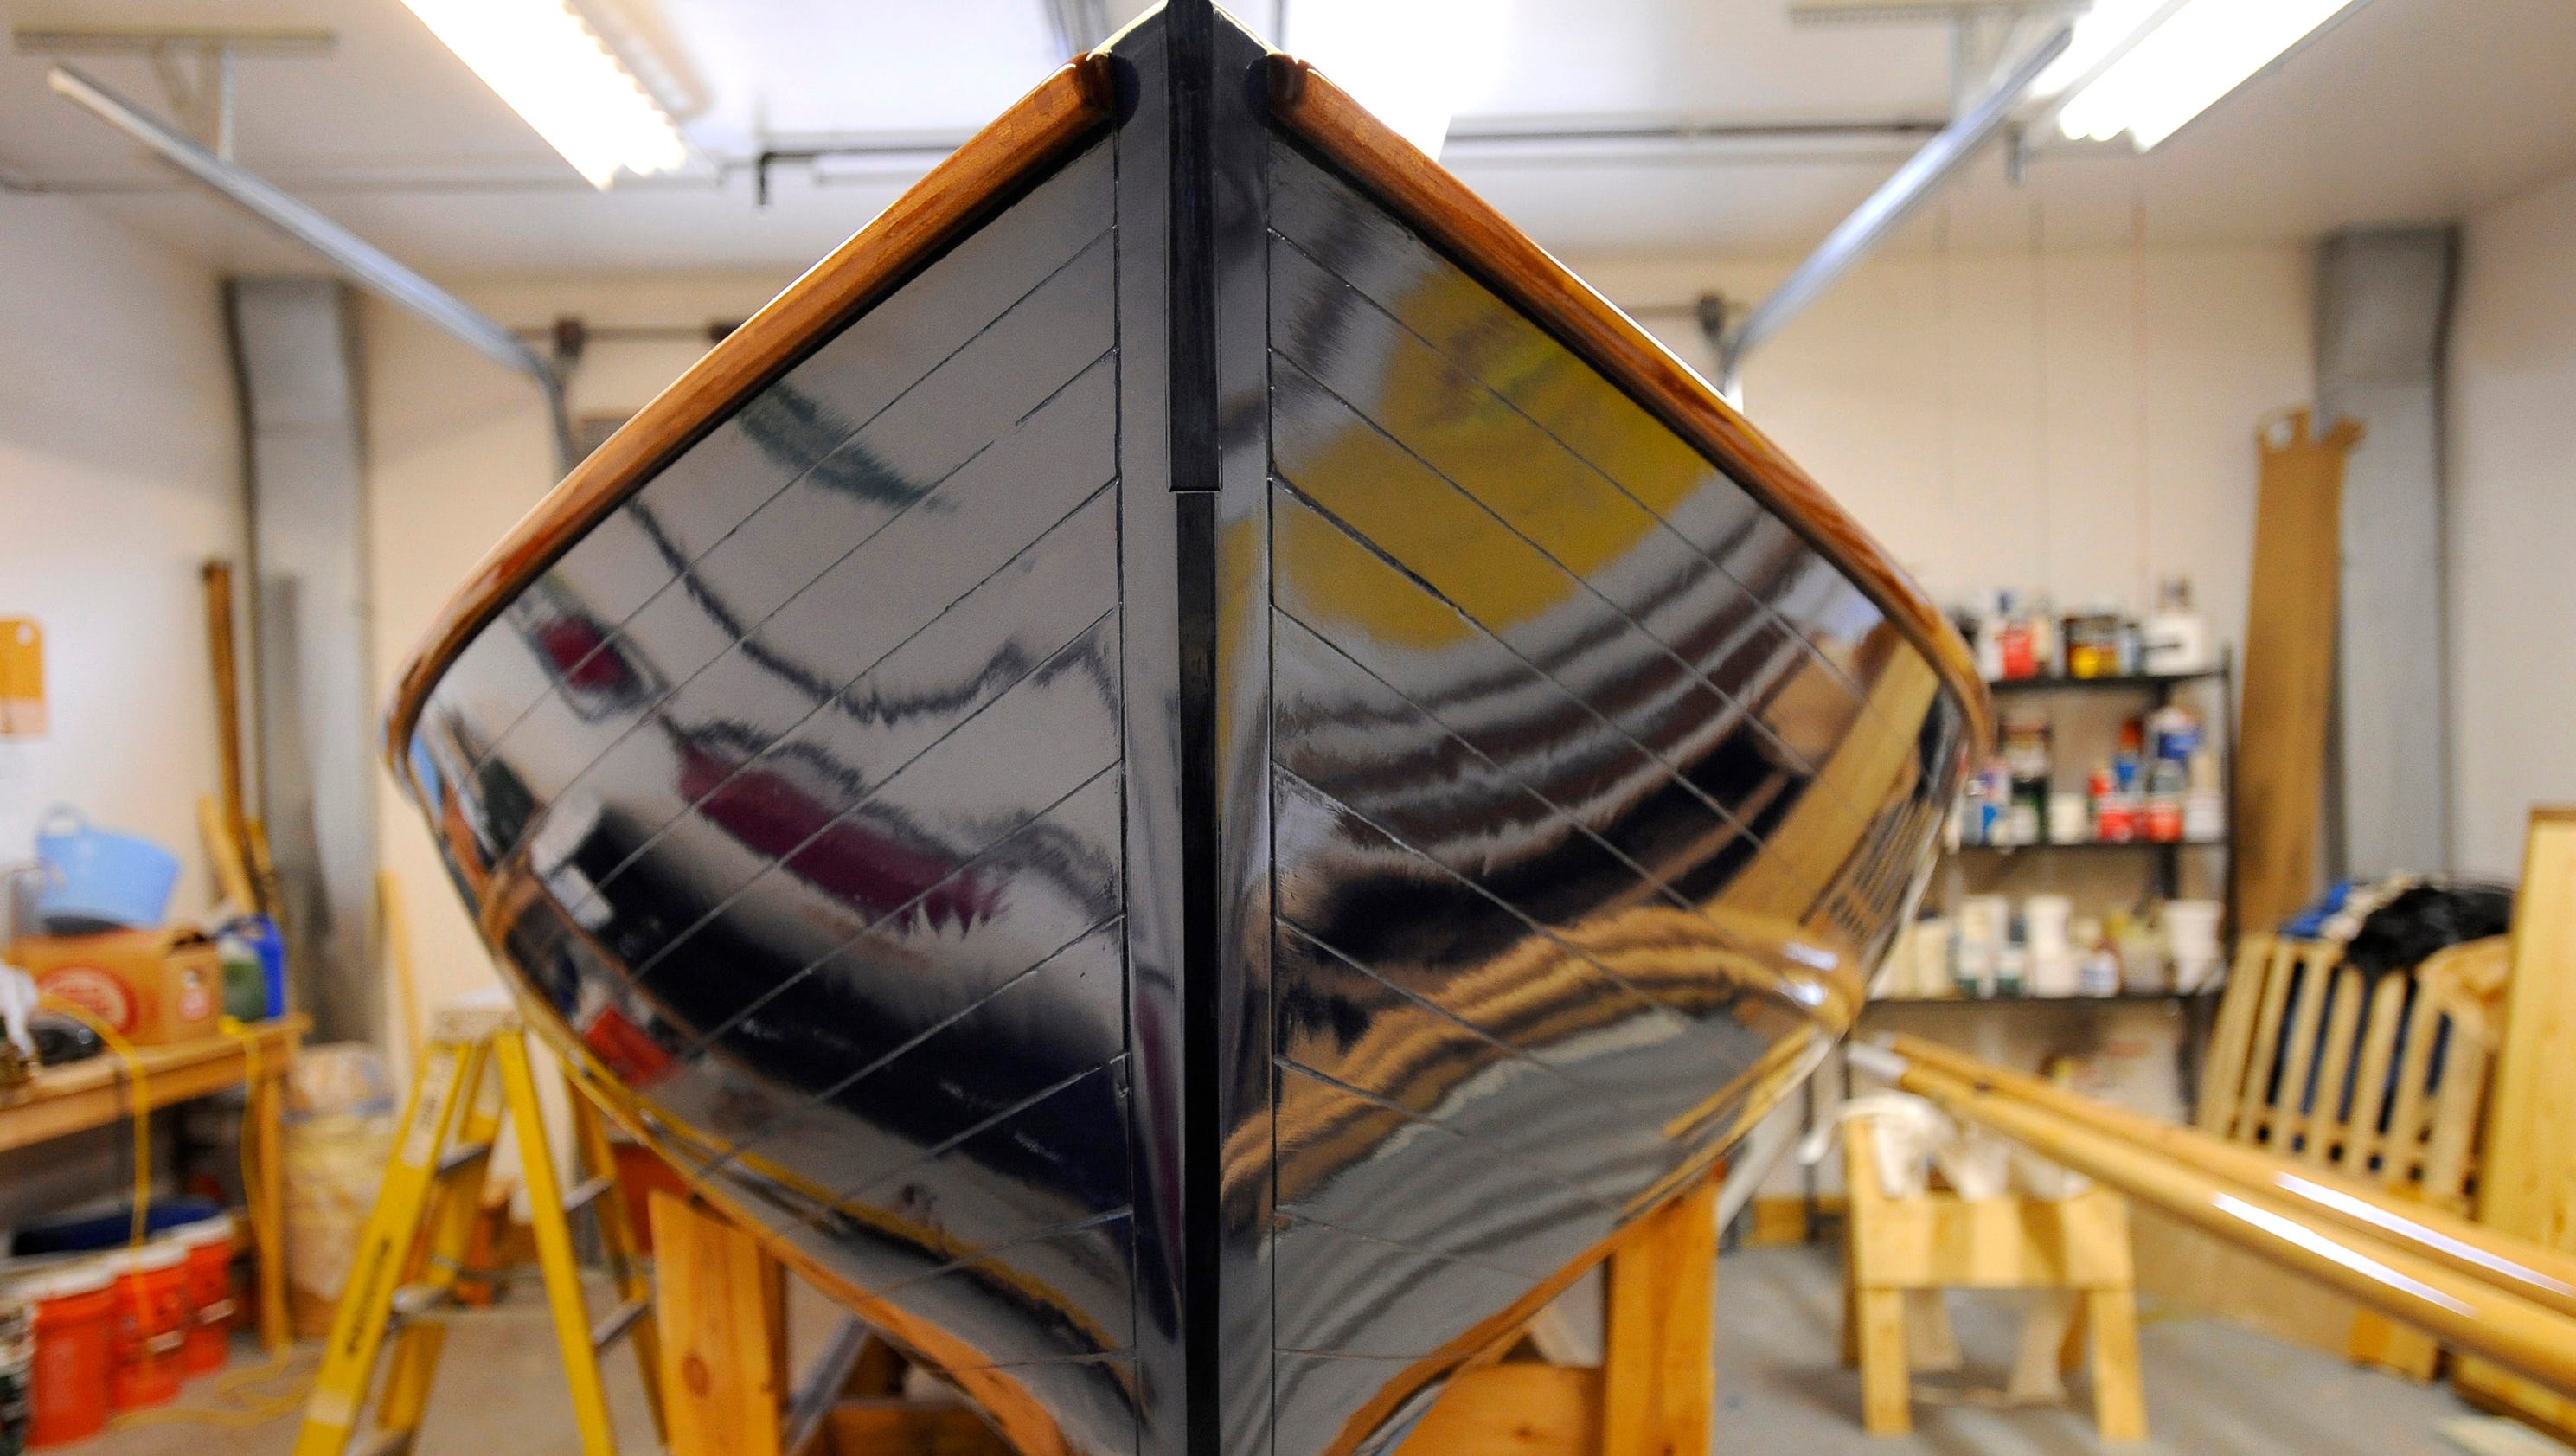 students in michigan take on art of building classic boats